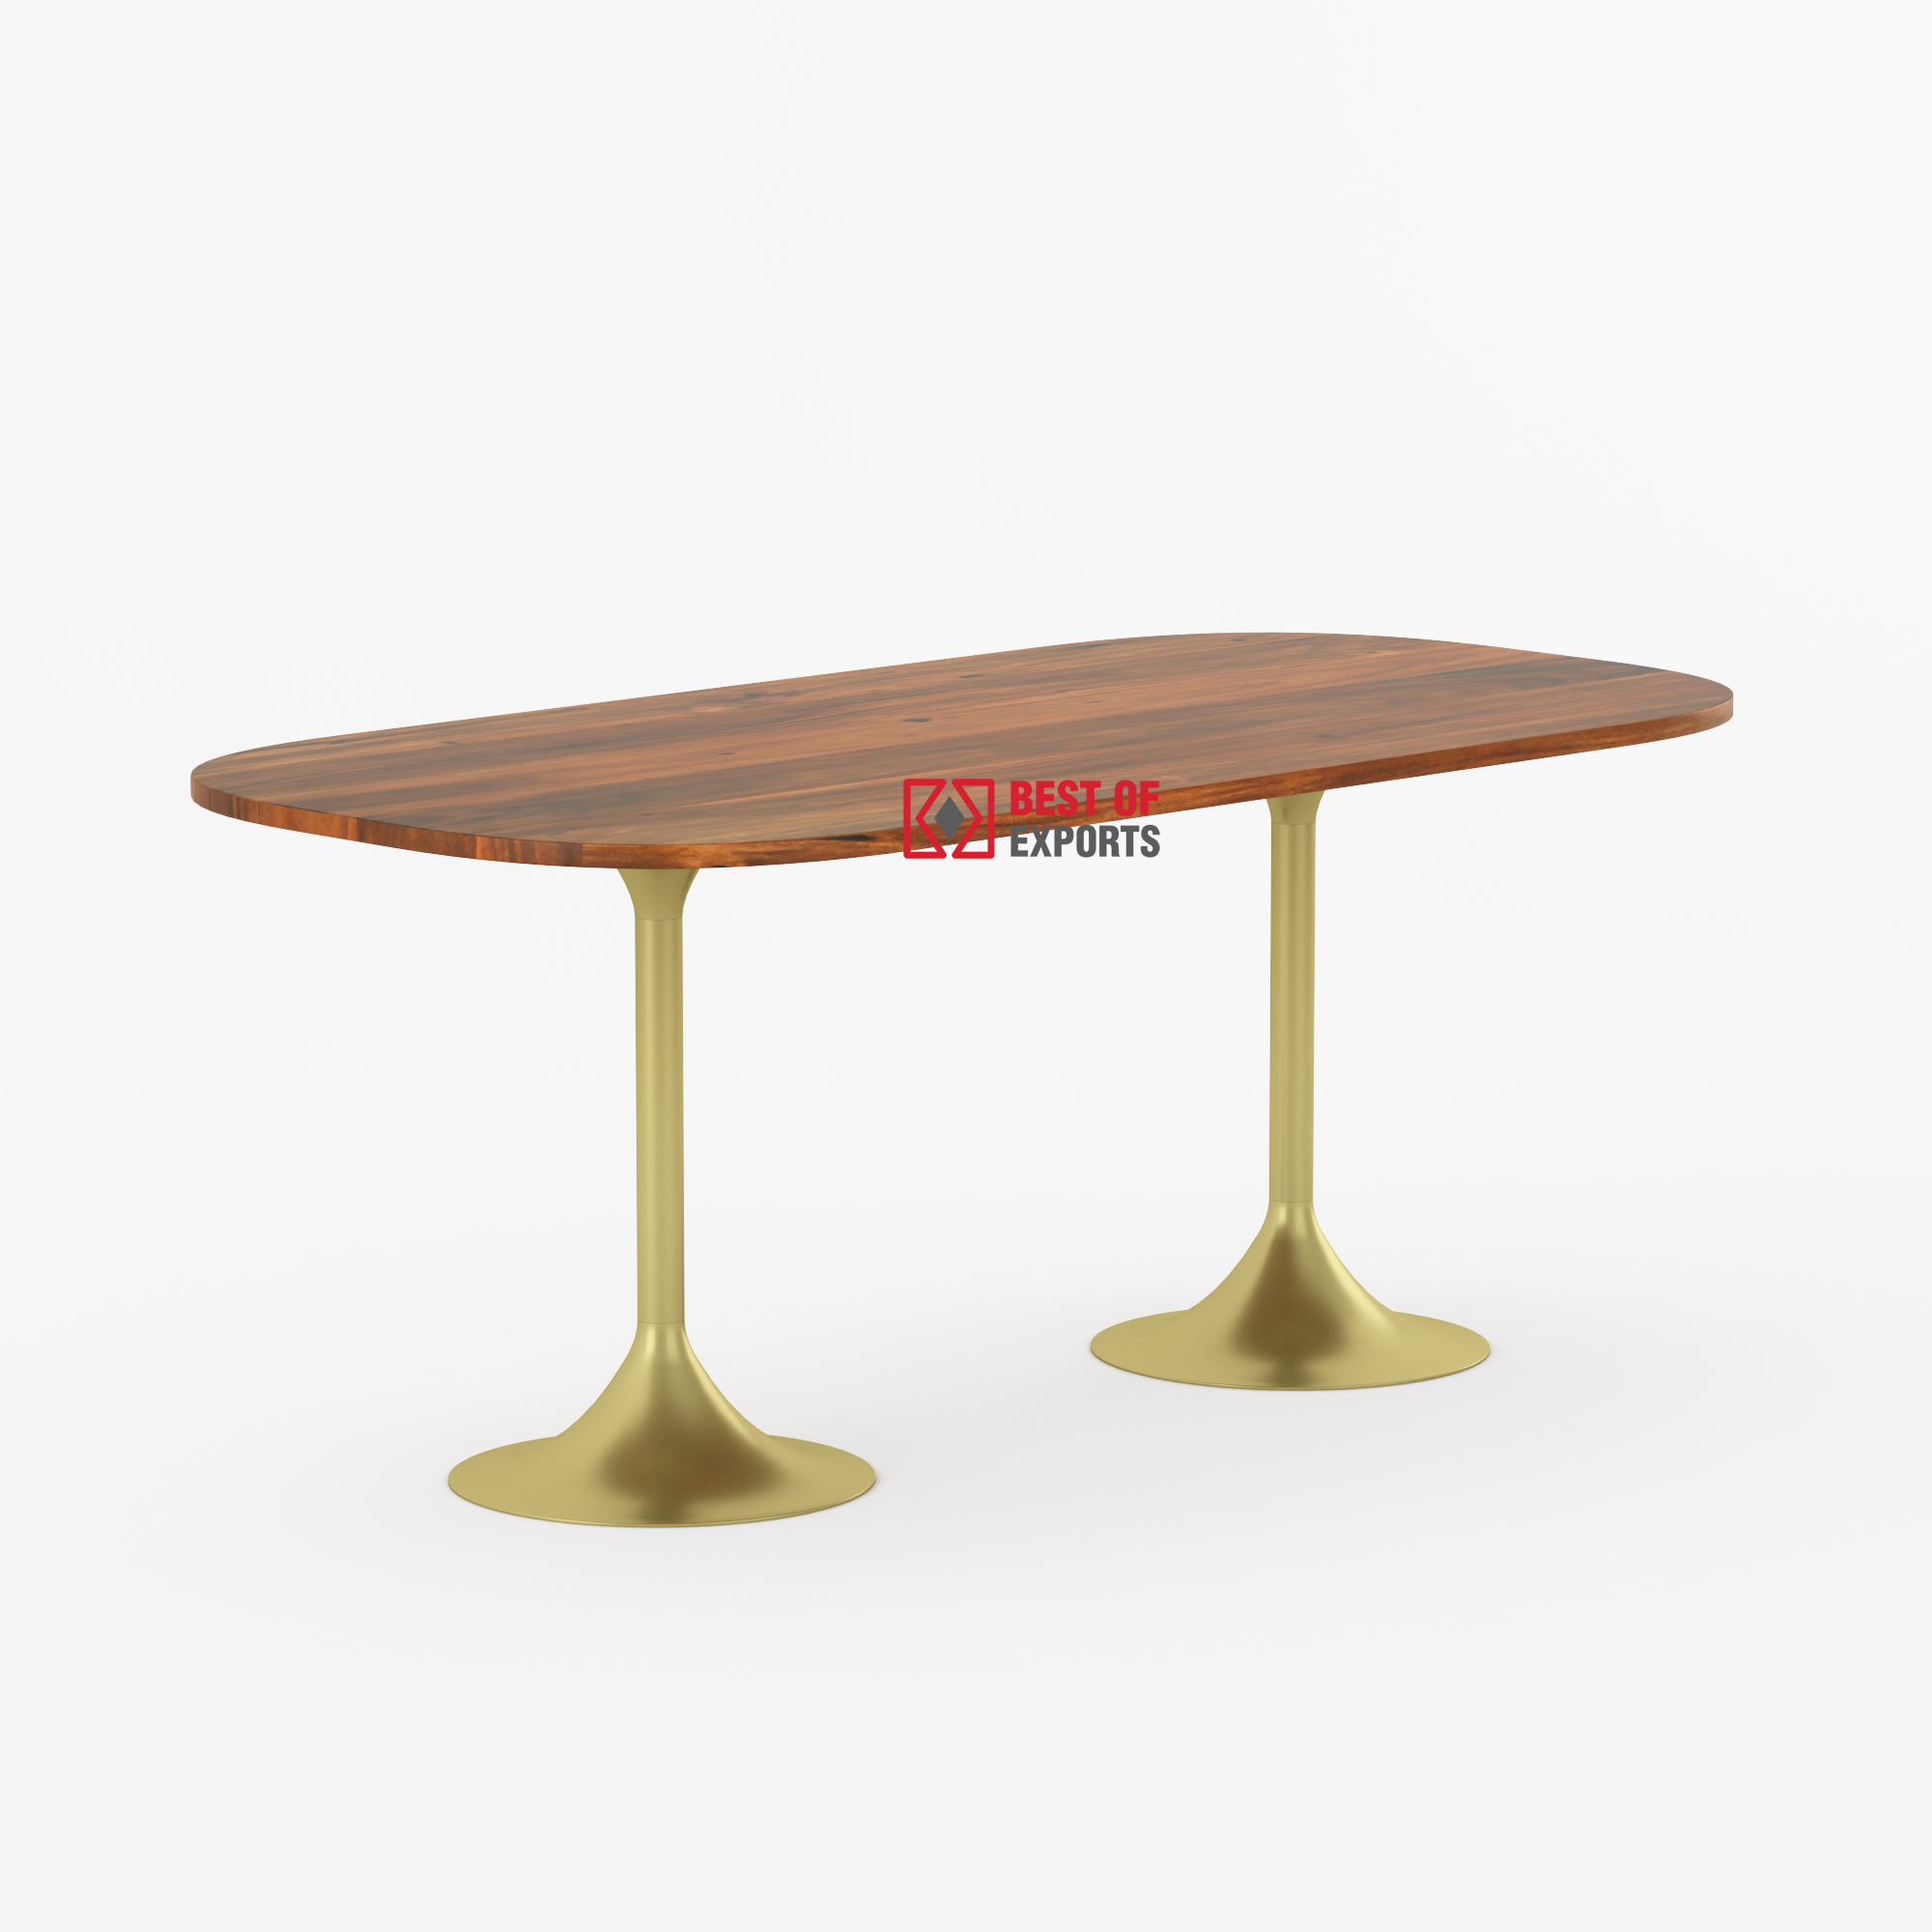 Restaurant Tables Manufacturer and Supplier in India - Best of Exports